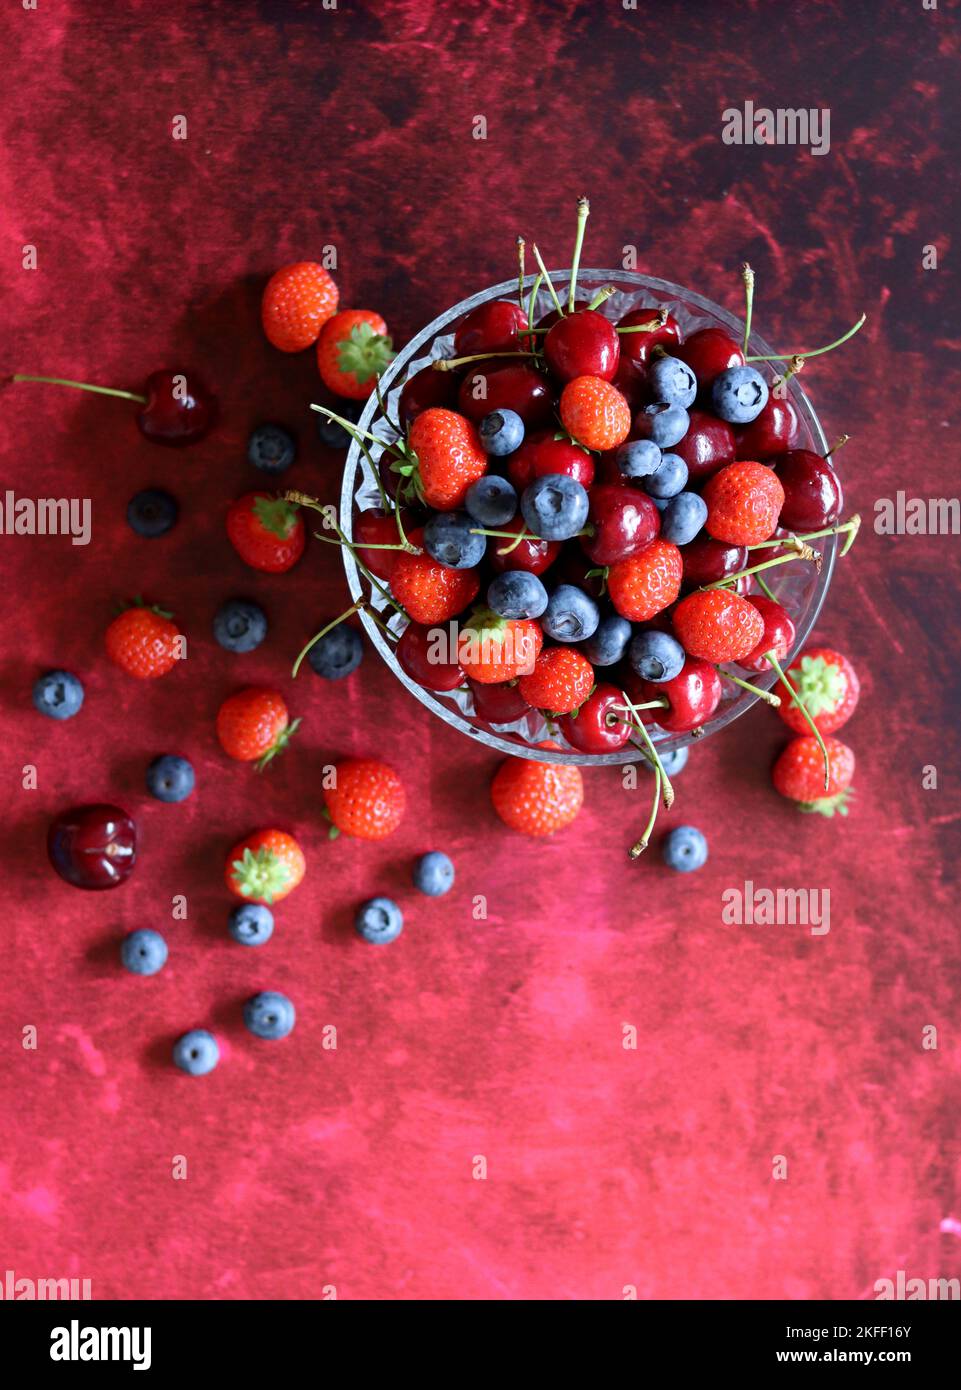 Top view photo of berries in a glass bowl. Vibrant colors of Summer. Red background with copy space. Natural antioxidants concept. Stock Photo